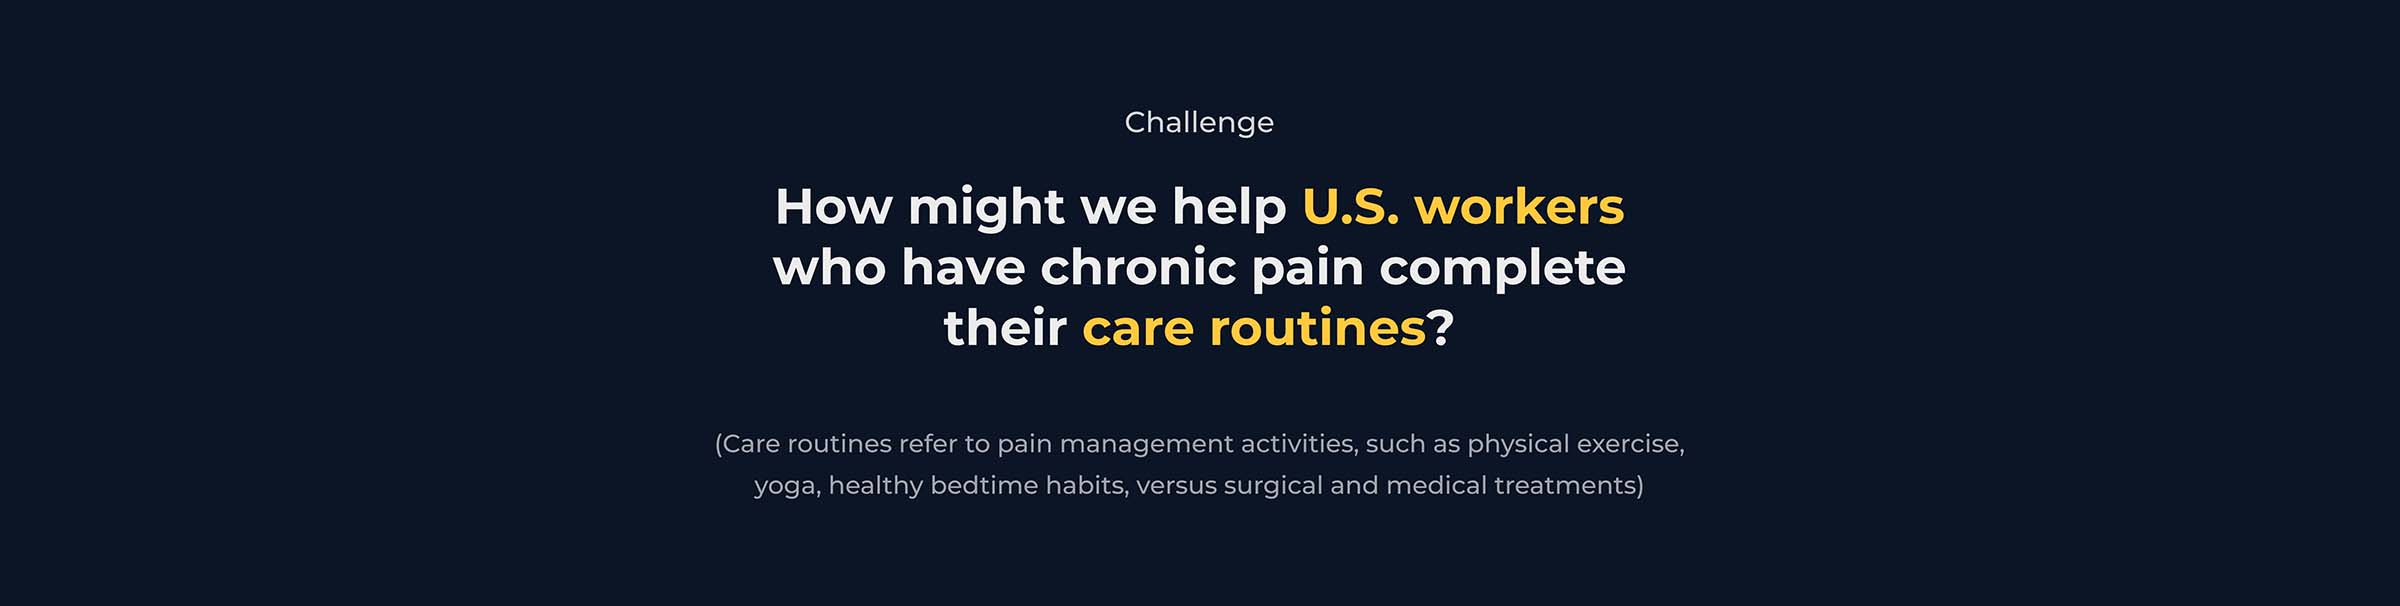 challenge: How might we help workers in the U.S. who have chronic pain complete their care routine